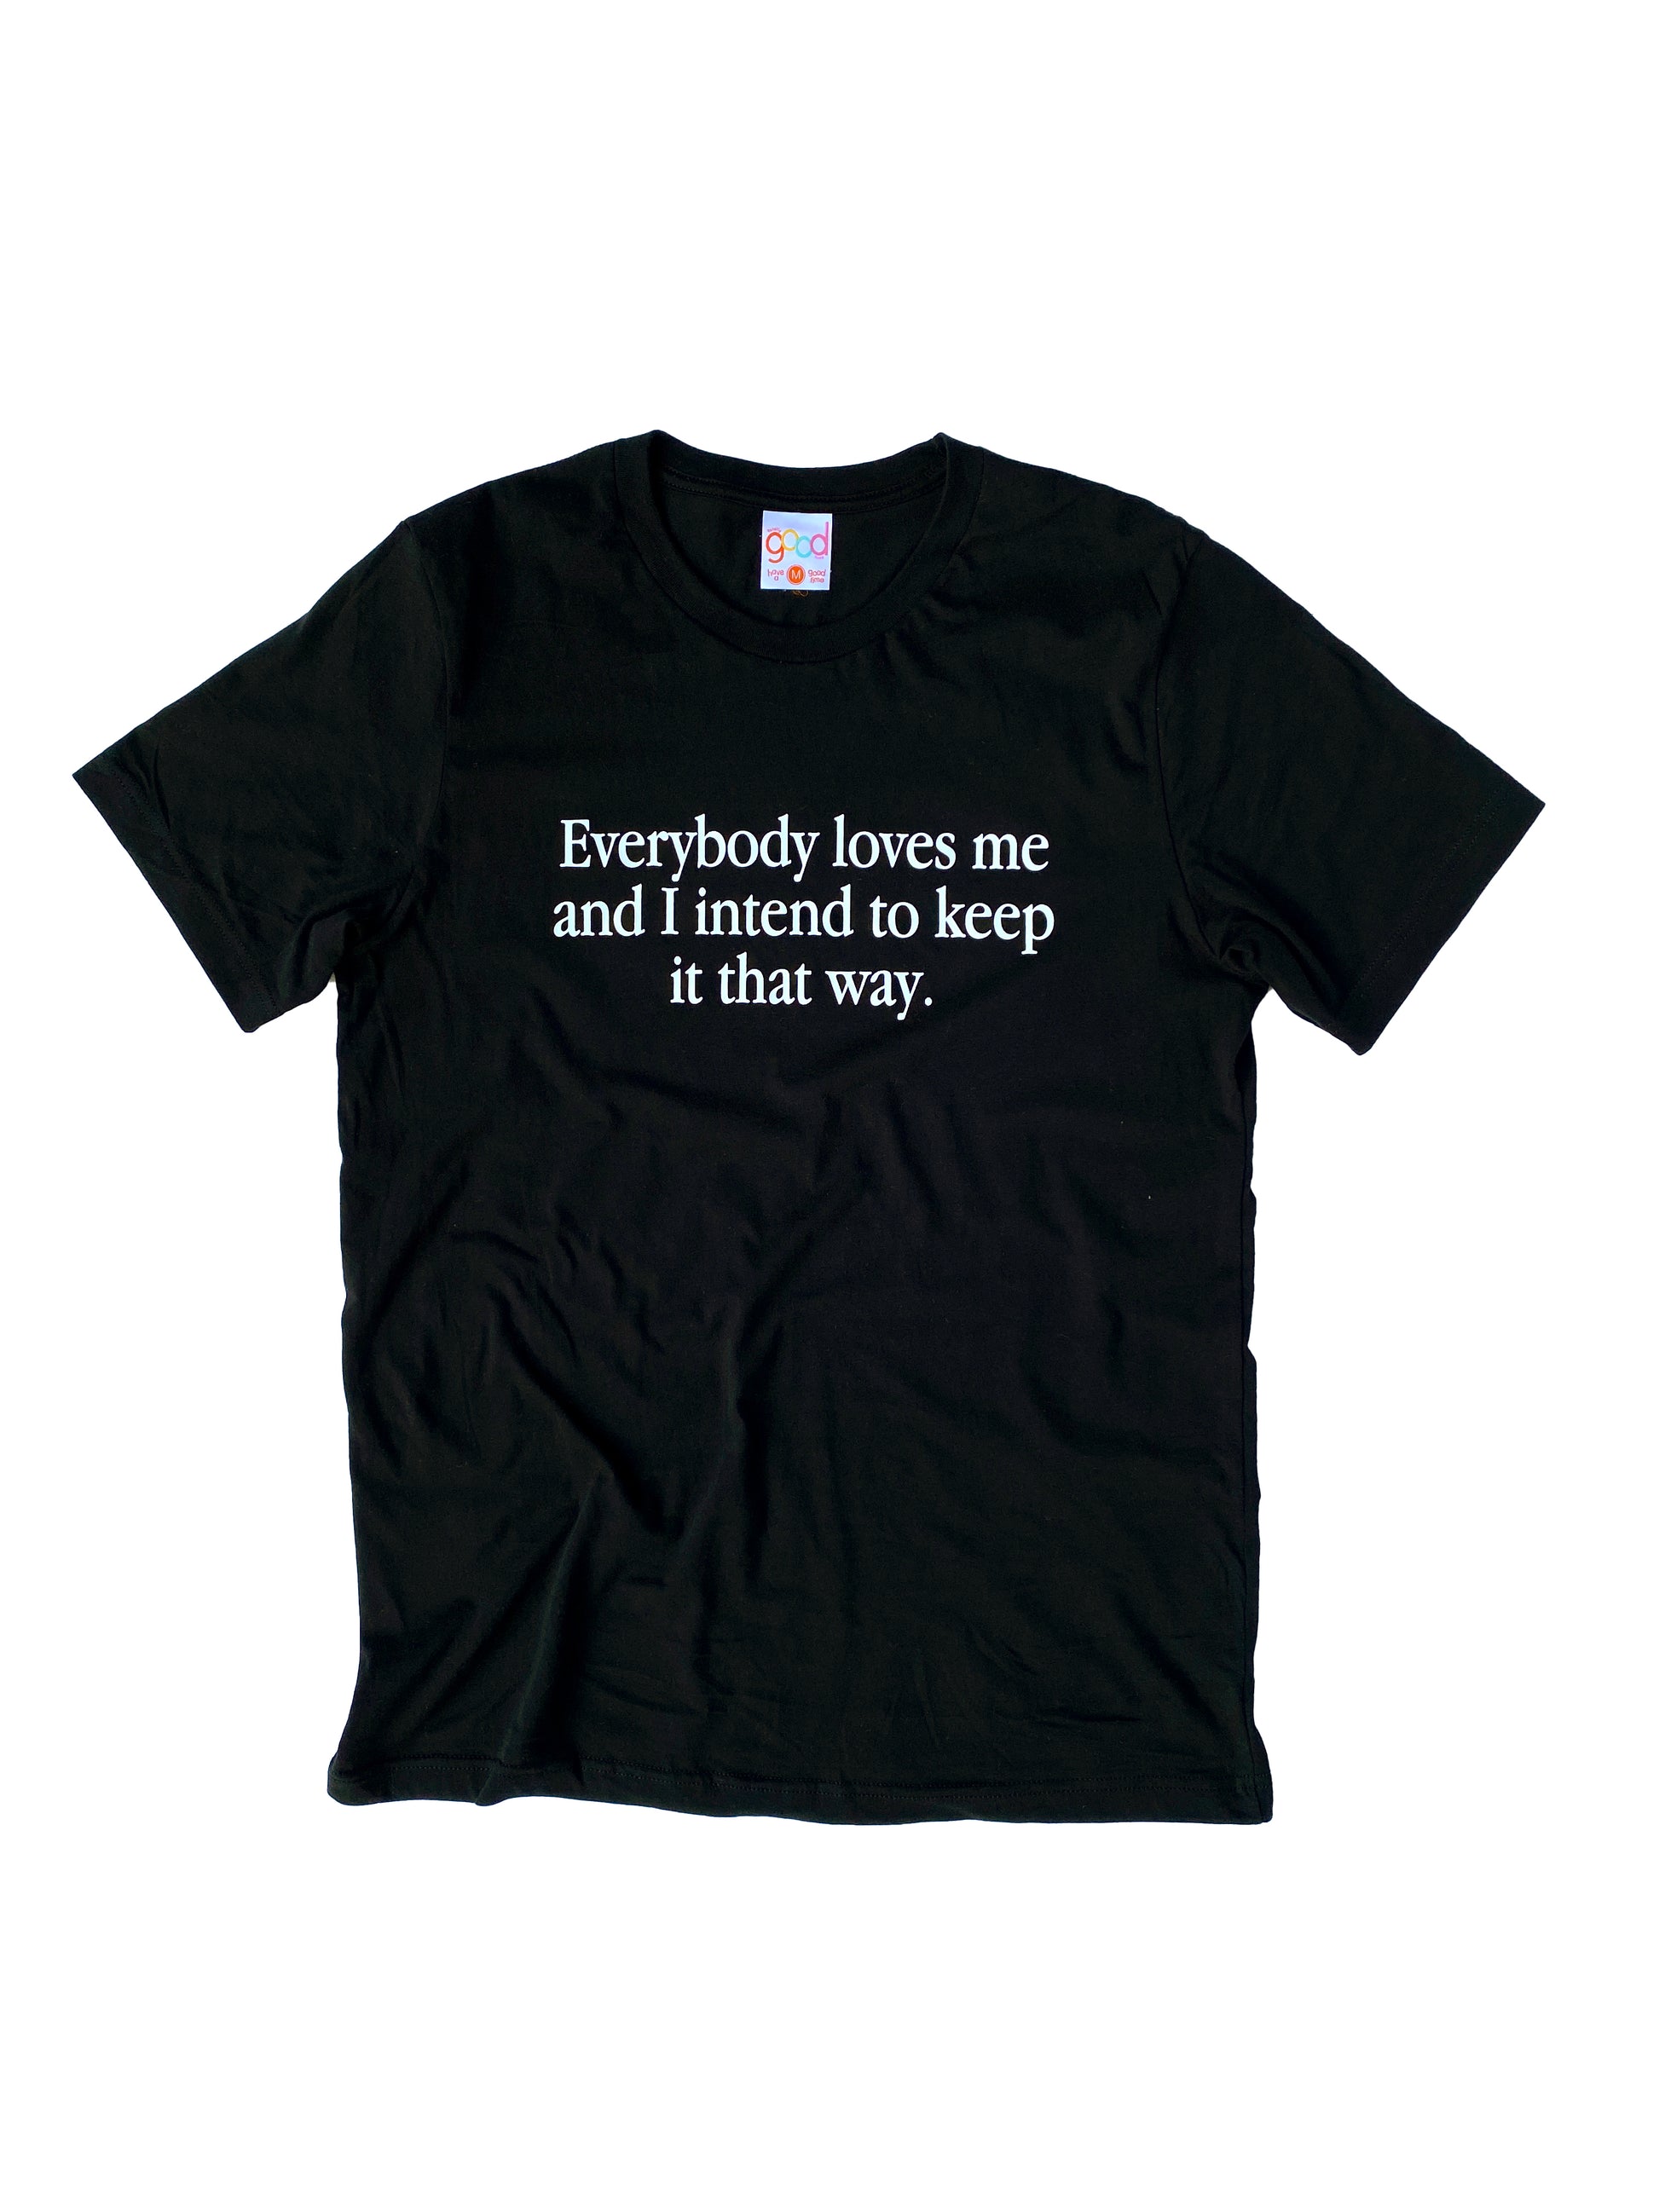 Cruel Intentions Everybody Loves Me And I Intend to Keep It That Way Tee